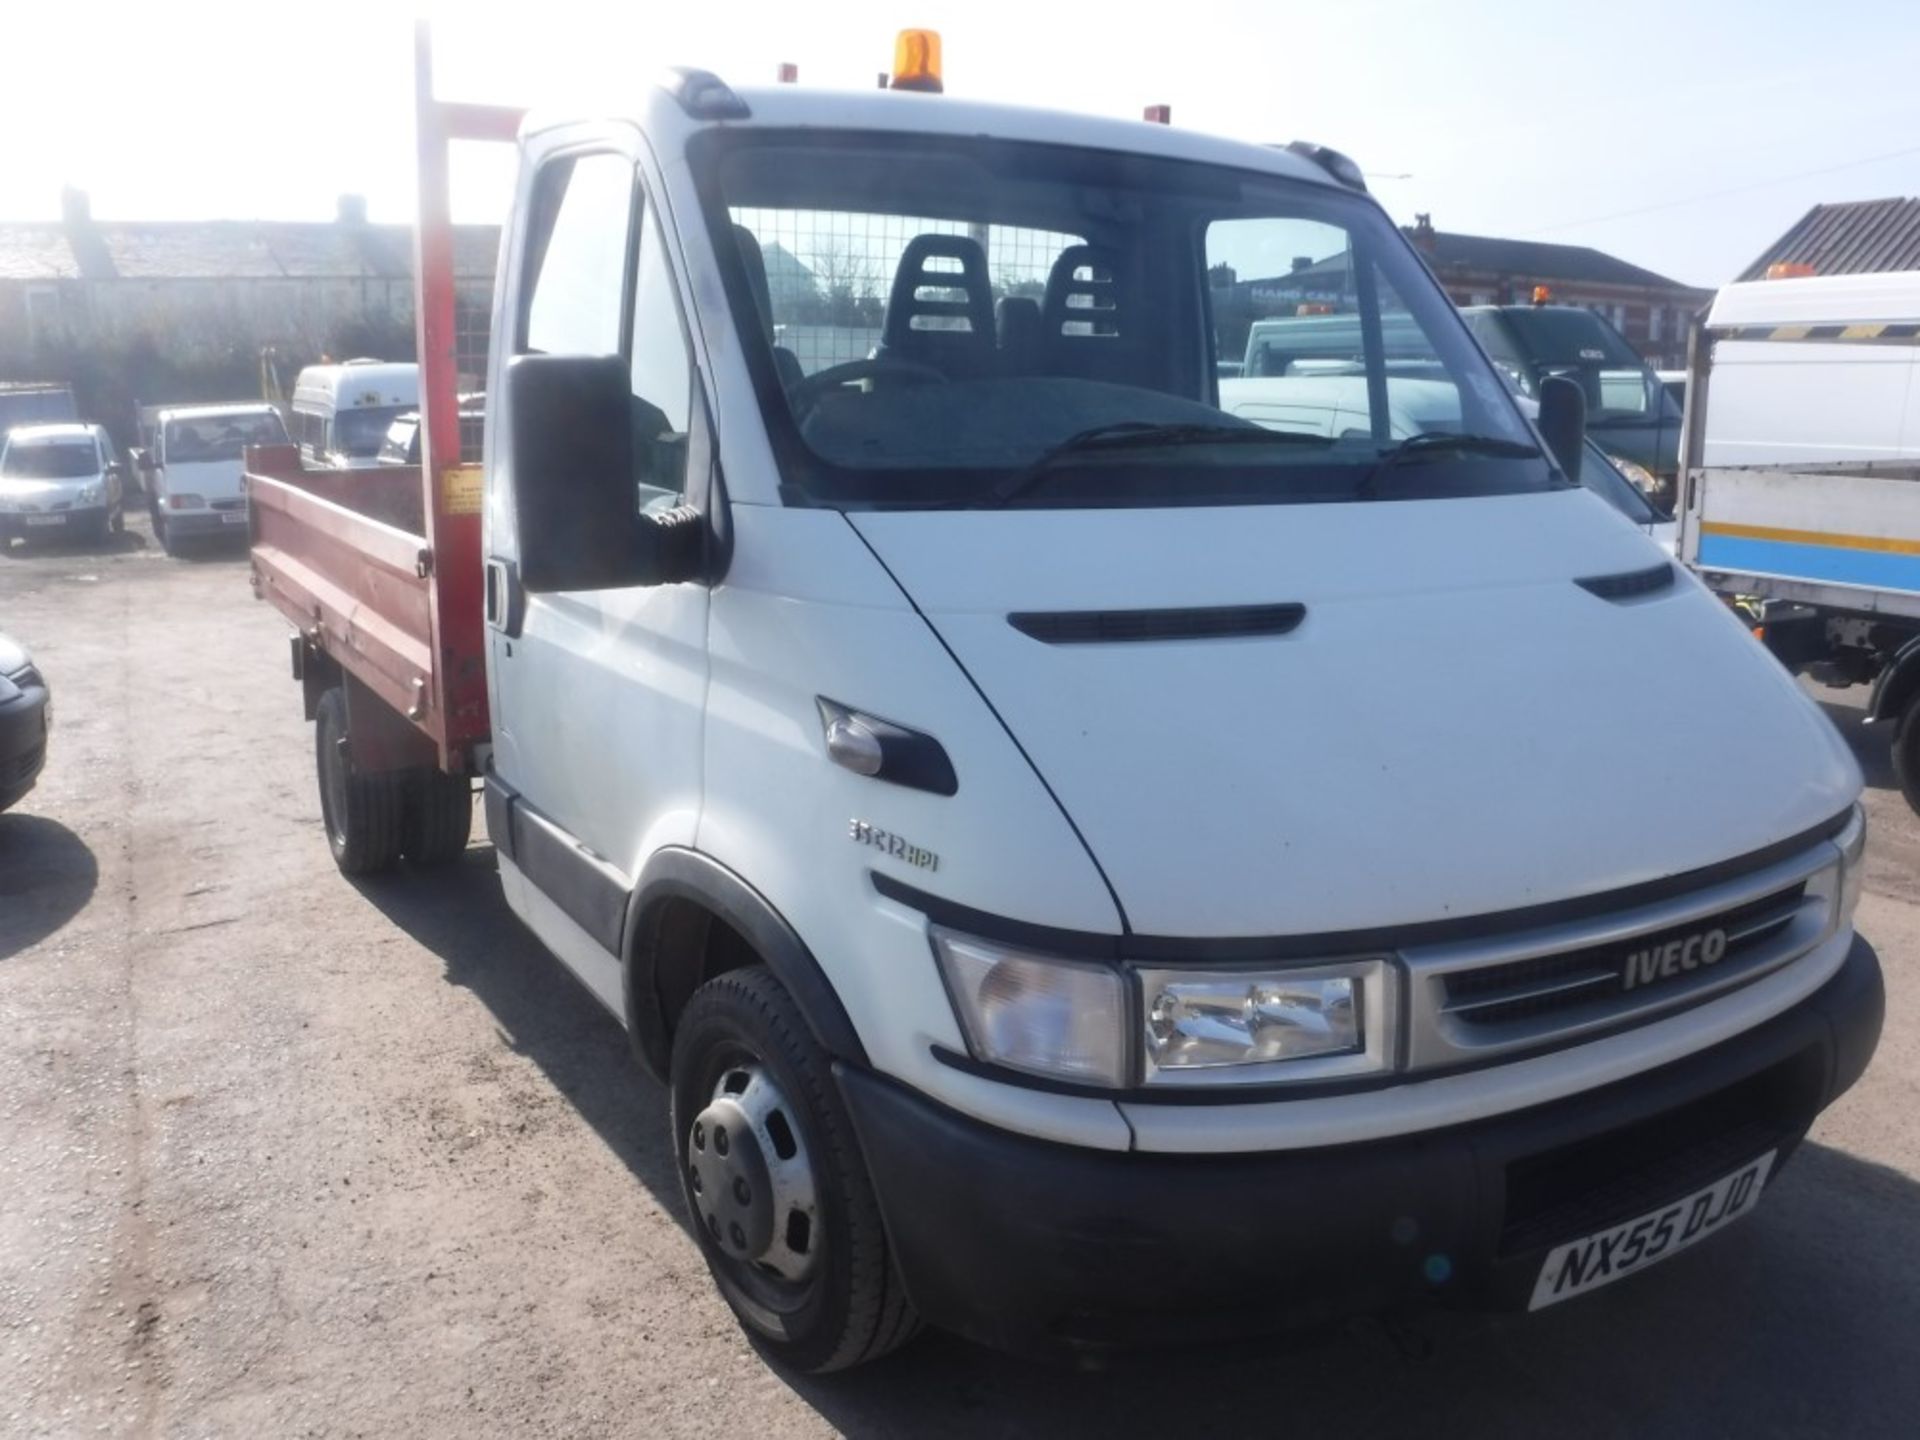 55 reg IVECO DAILY 35C12 MWB TIPPER, 1ST REG 09/05, TEST 04/16, 66662M WARRANTED, V5 HERE, 1